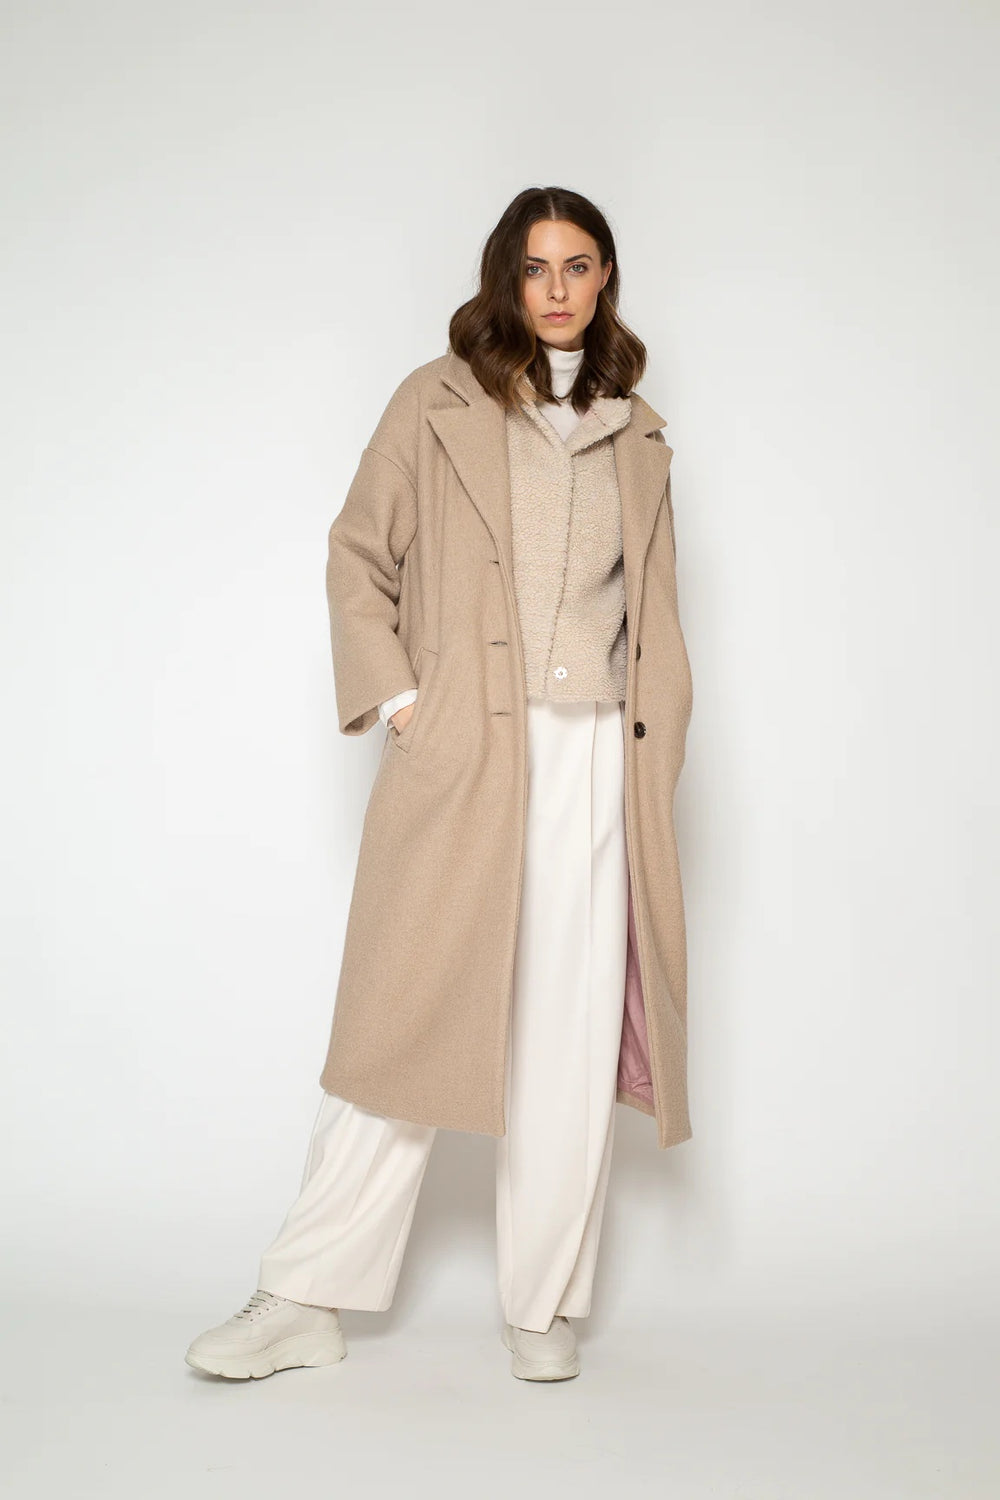 Woman wearing the Selma Coat sewing pattern from Bara Studio on The Fold Line. A coat pattern made in wool, cotton or blended fibre fabrics, featuring a full lining, lapel collar, welt pockets, back vent, three button front closure, midi length and drop s